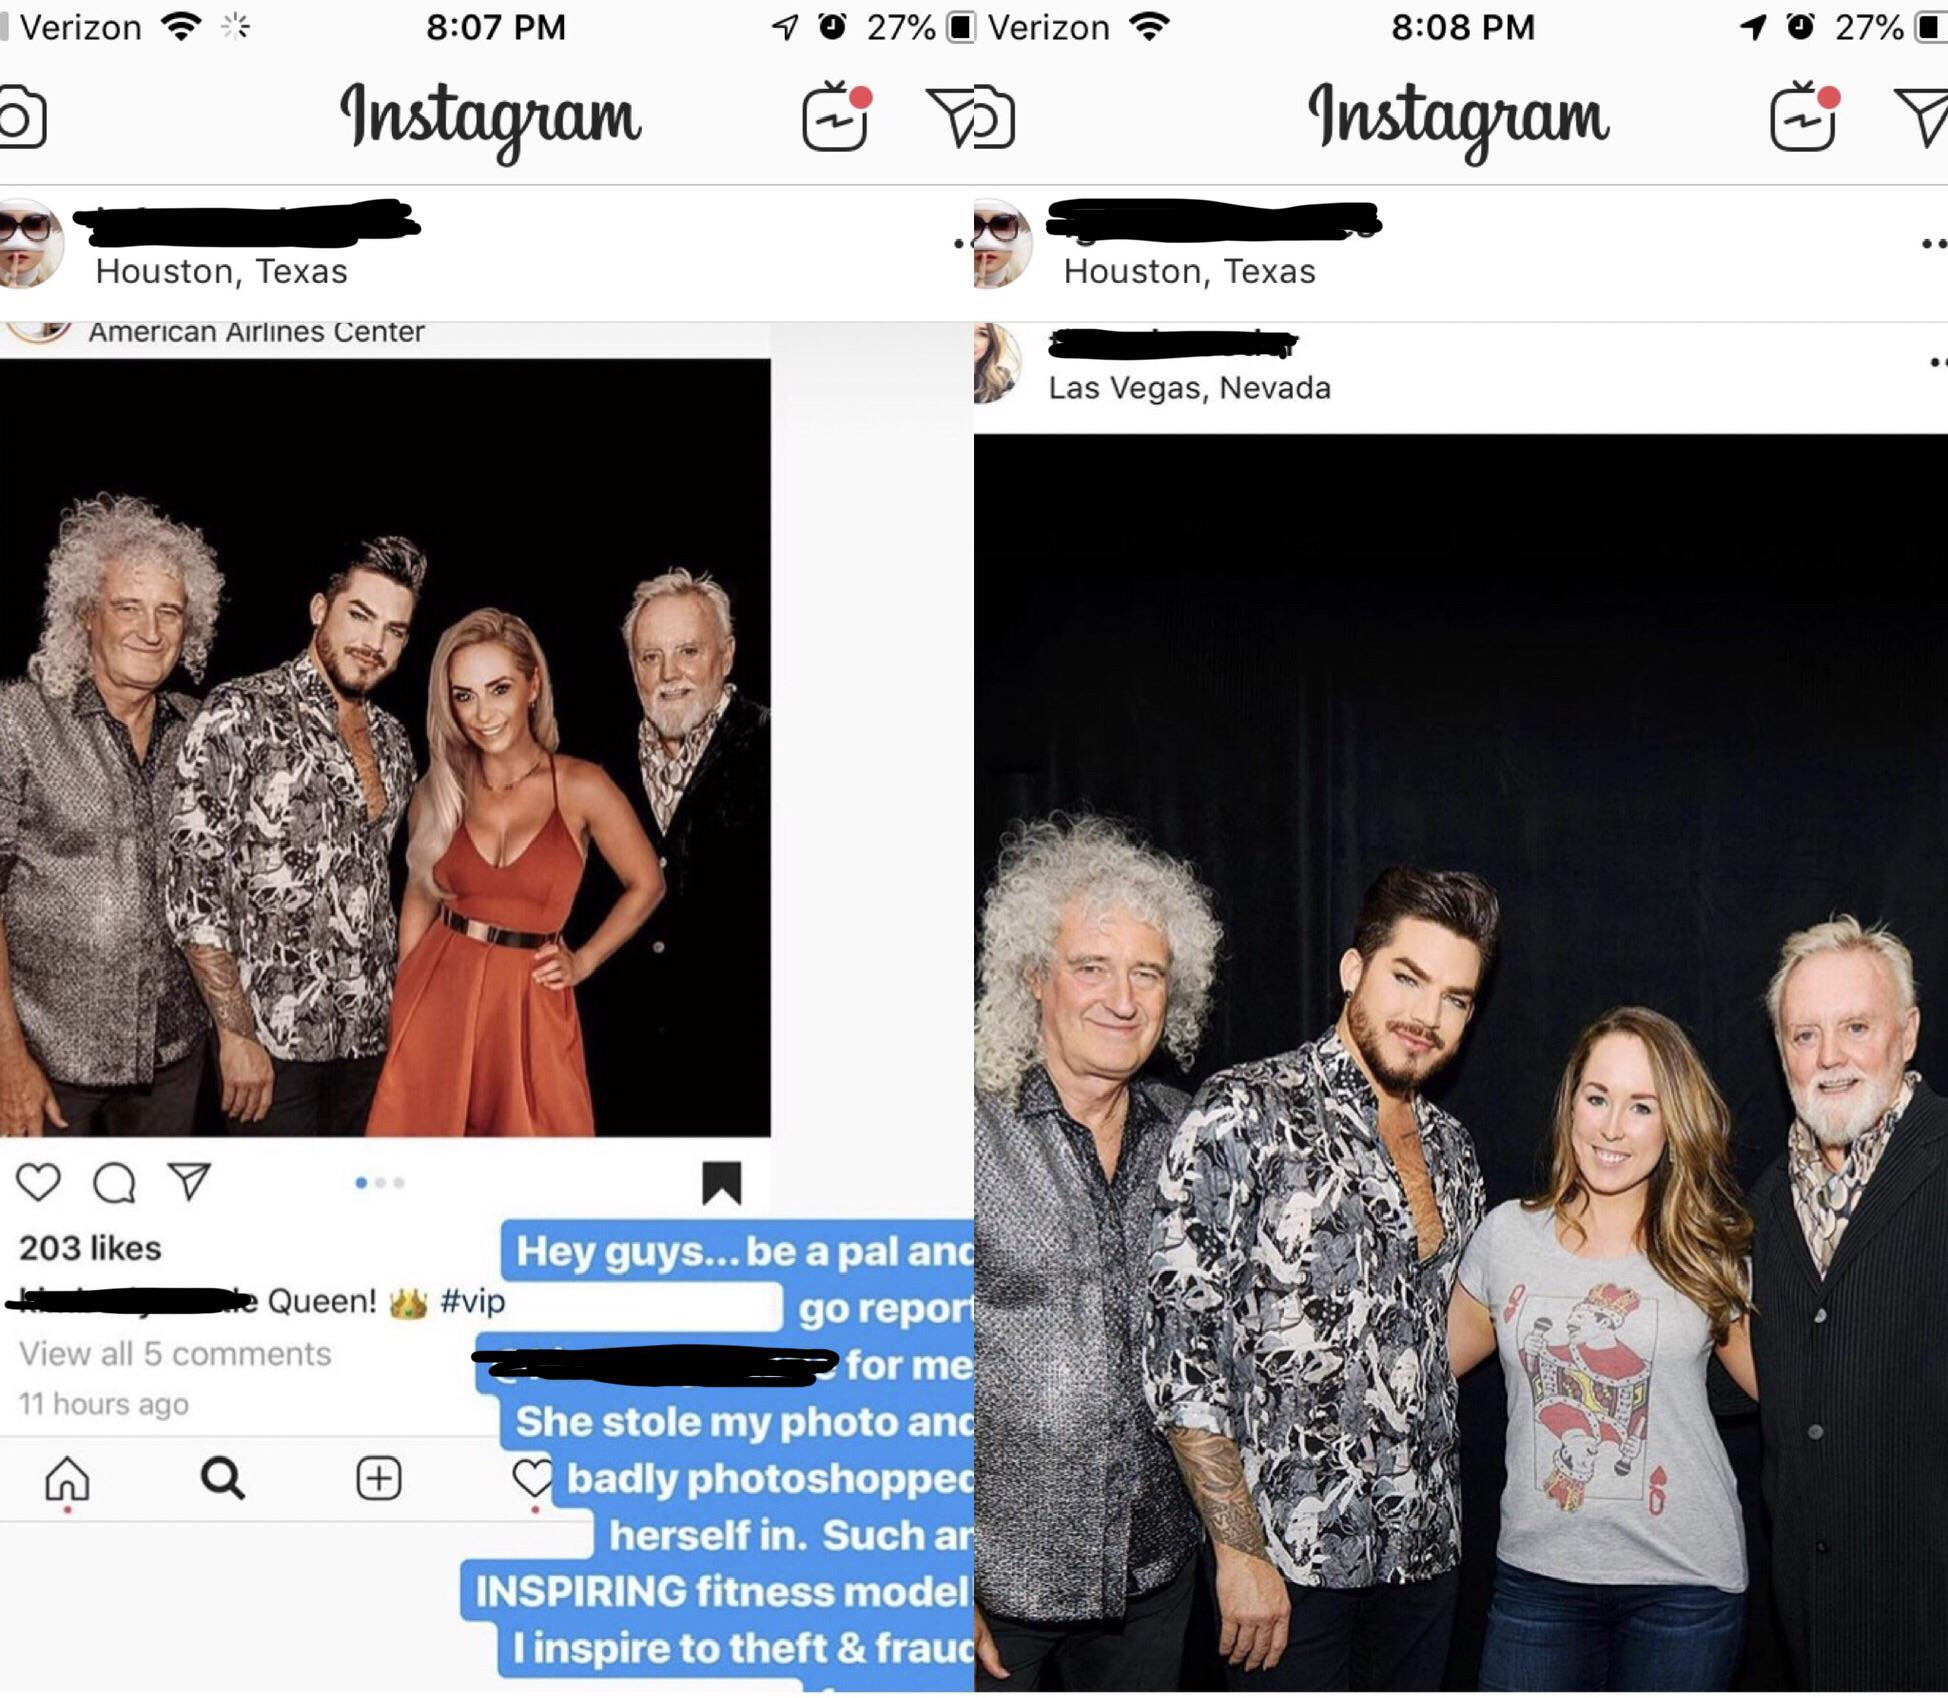 55. “Instagram “model” steals photo of Queen and photoshops herself in”